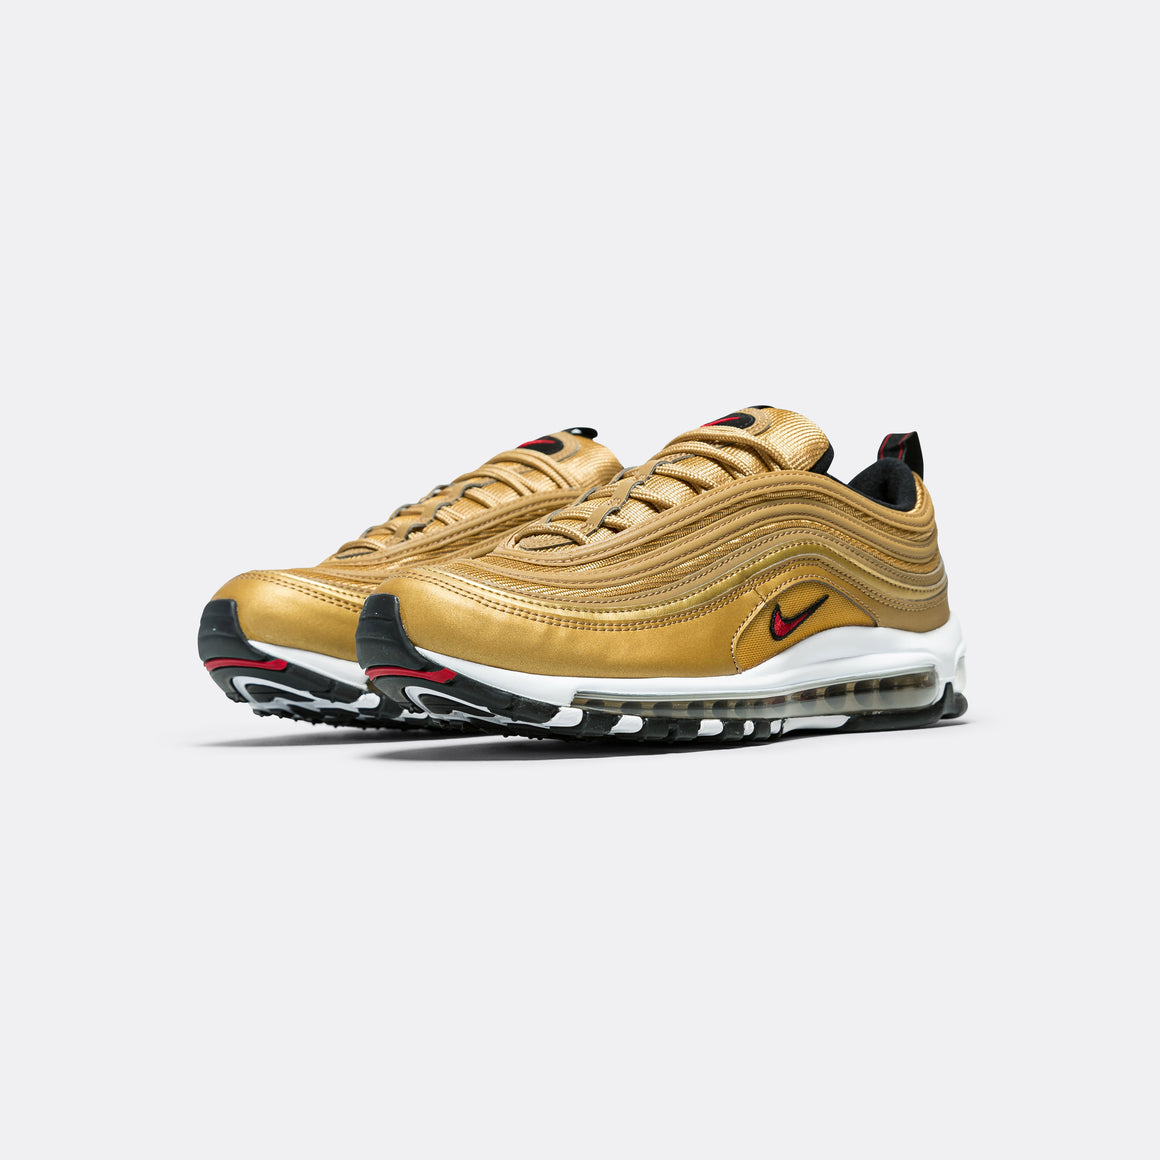 Nike - Air Max 97 OG - Metallic Gold/Varsity Red/Black - UP THERE